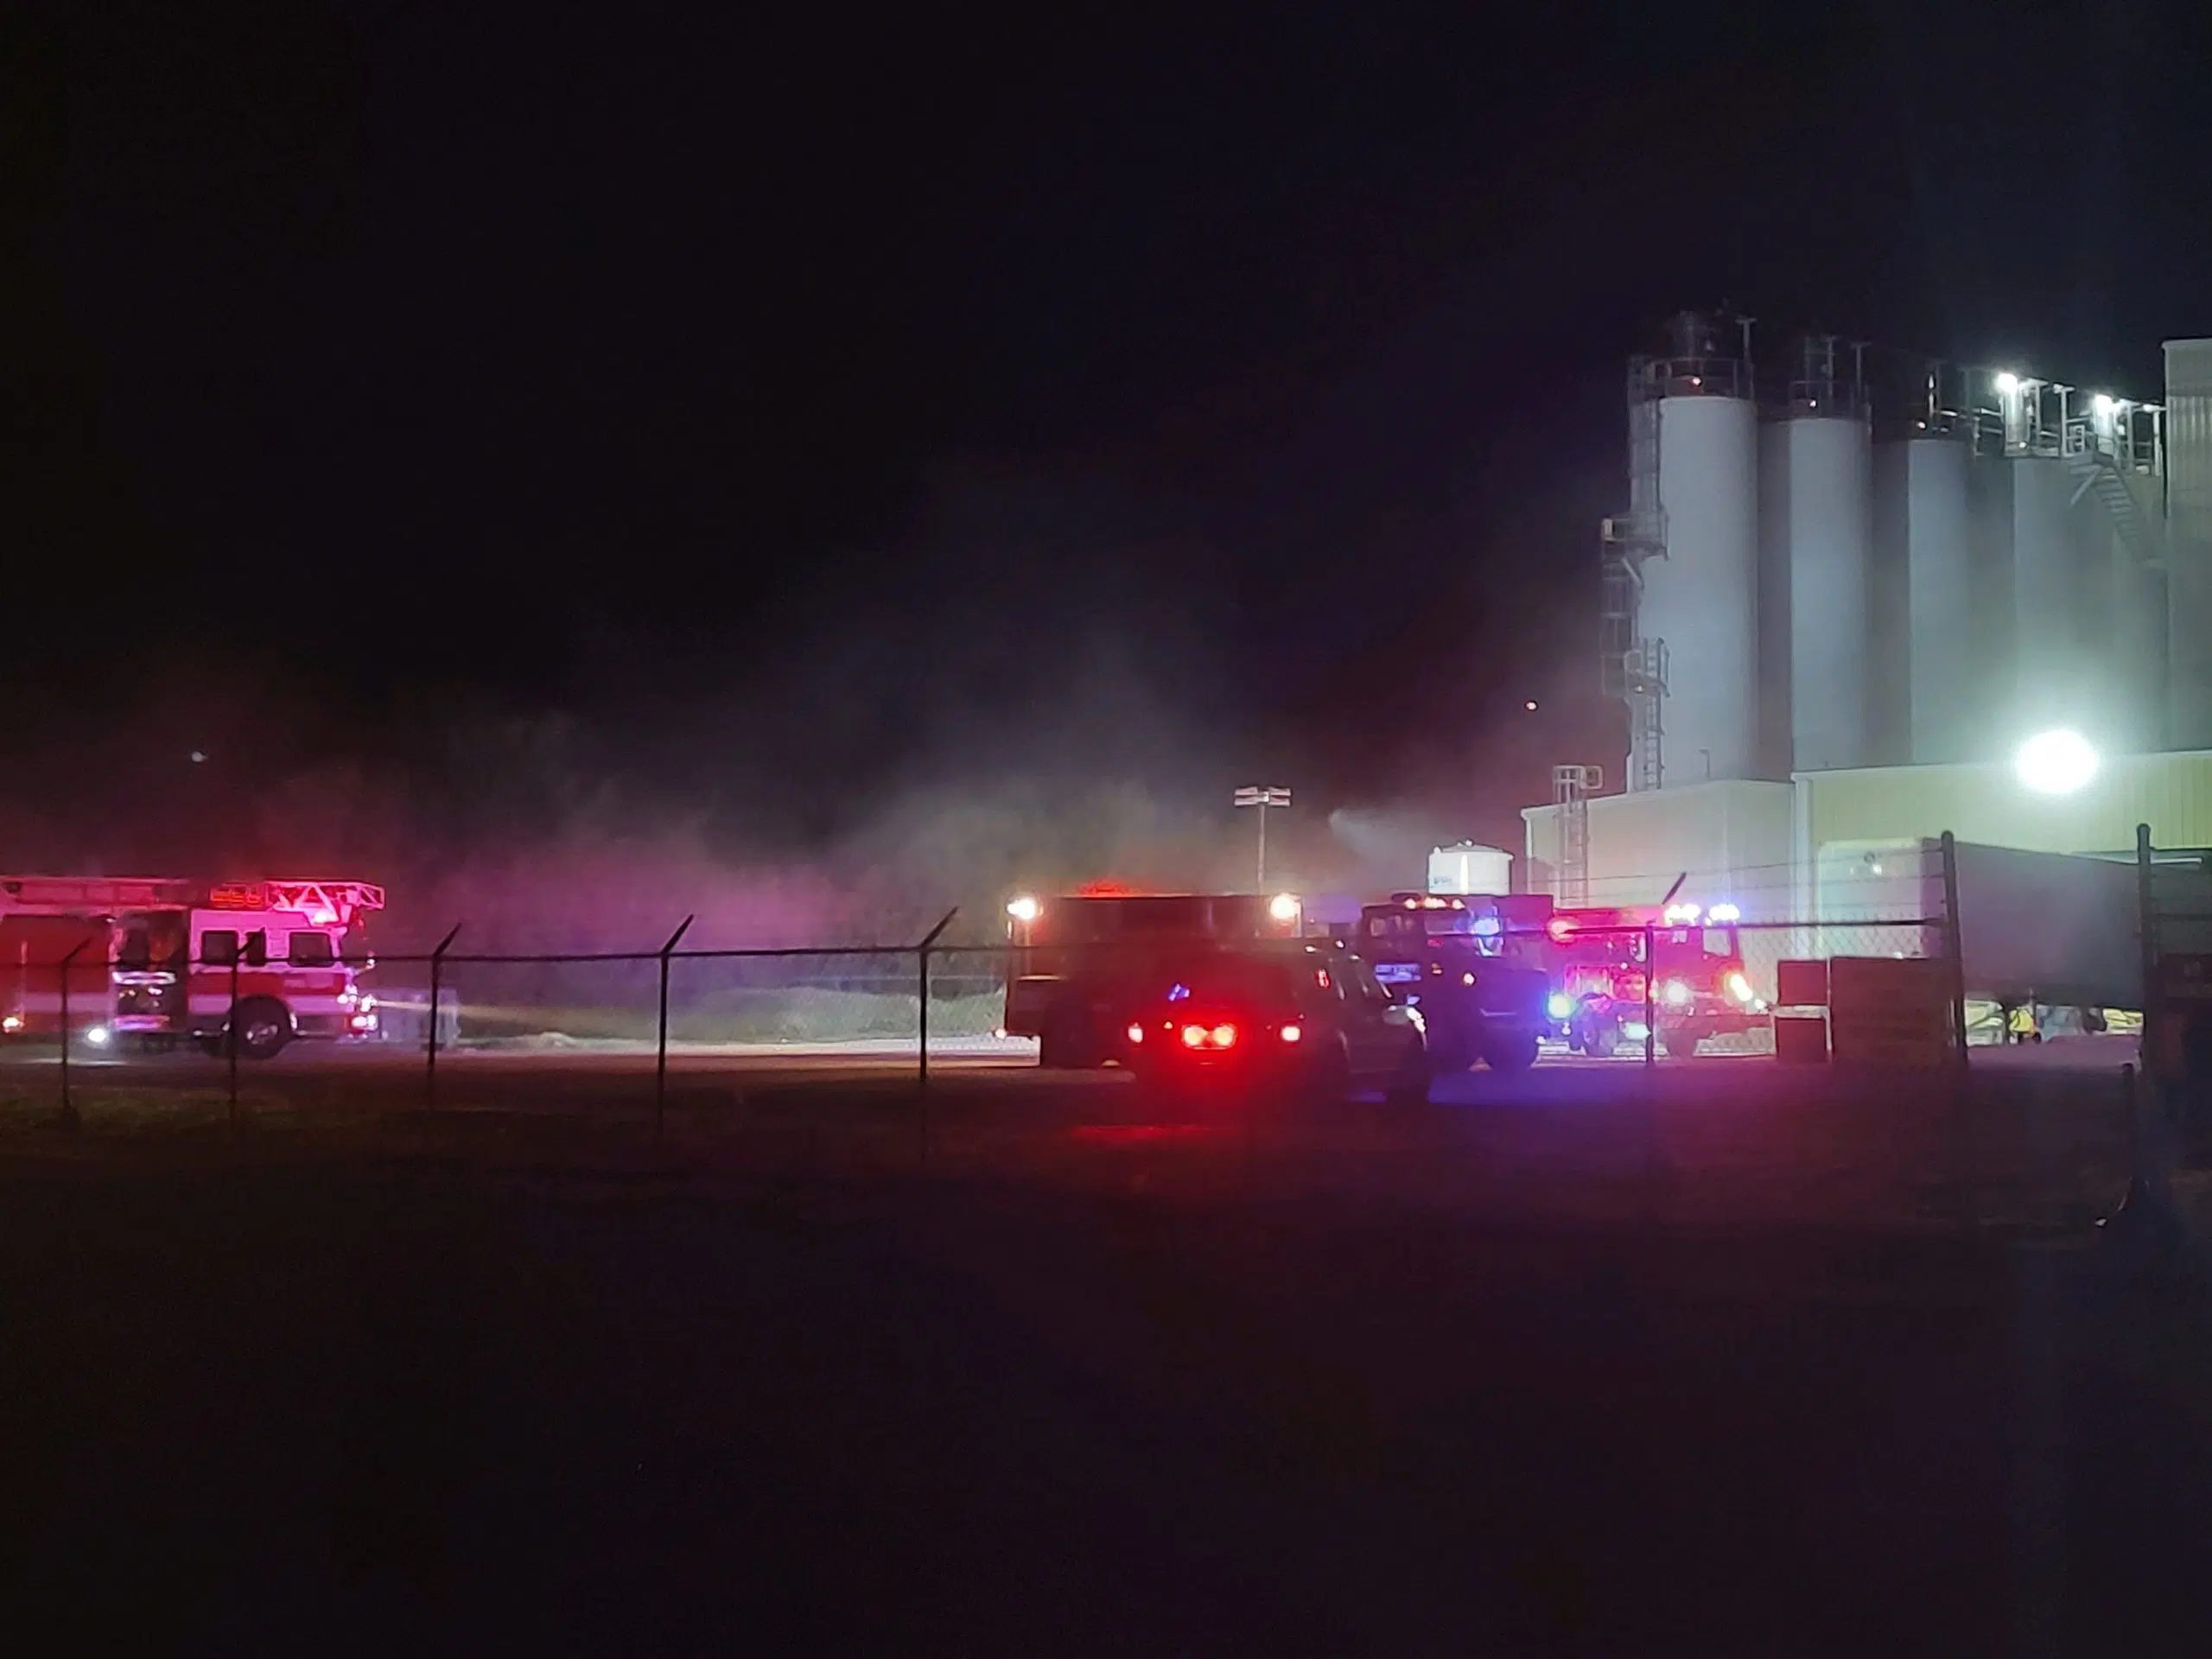 THERMAL CERAMICS FIRE: Investigation continues after fire, possible explosion inside building